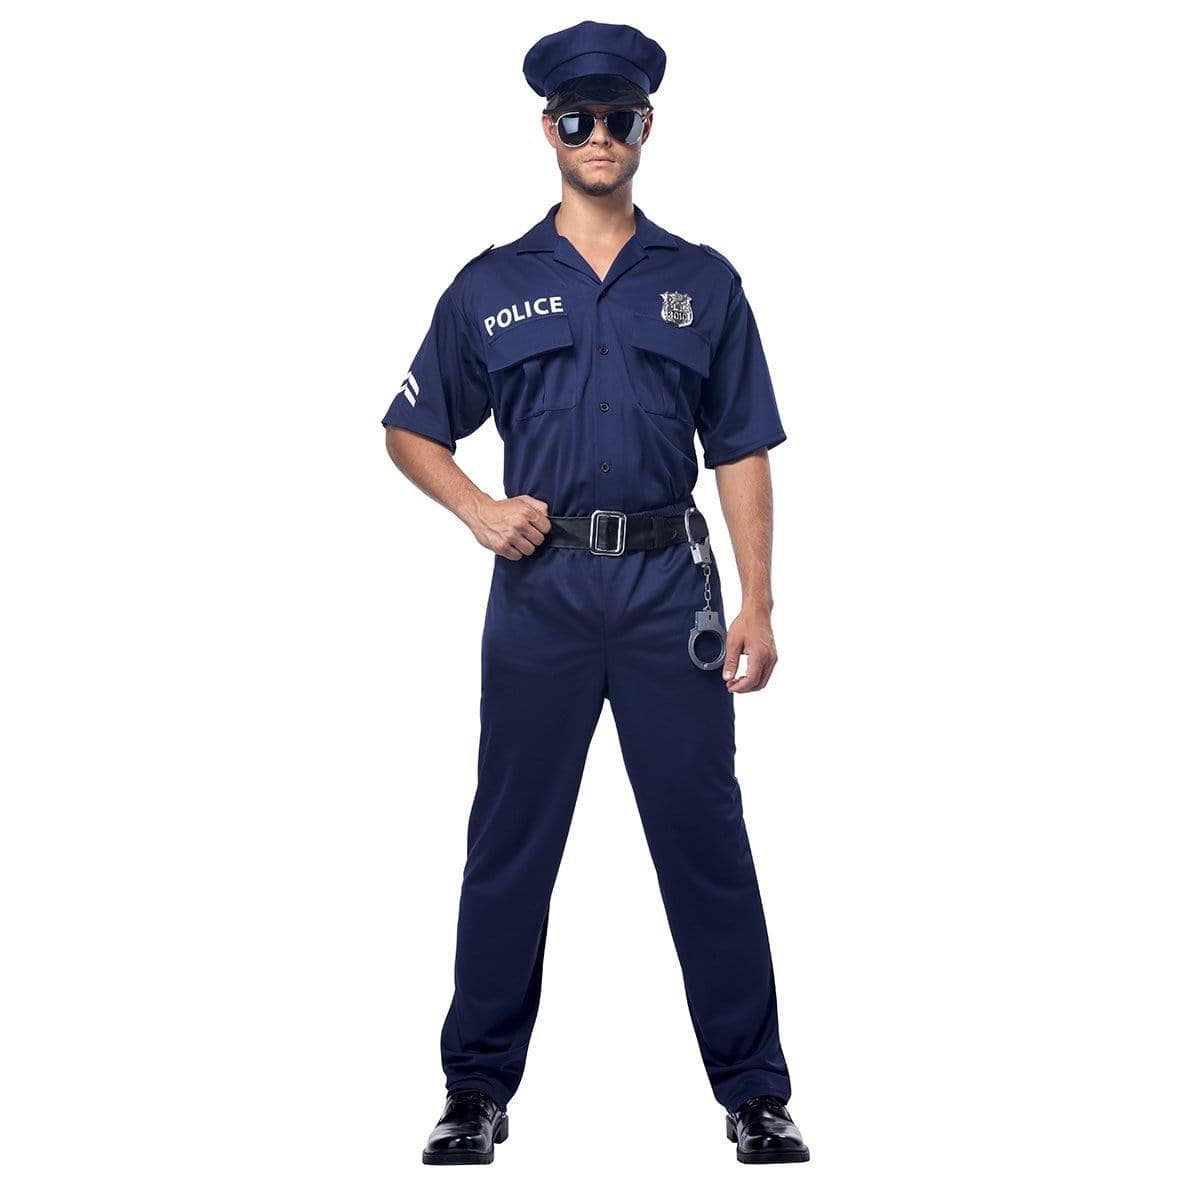 Buy Costumes Police Costume for Adults sold at Party Expert